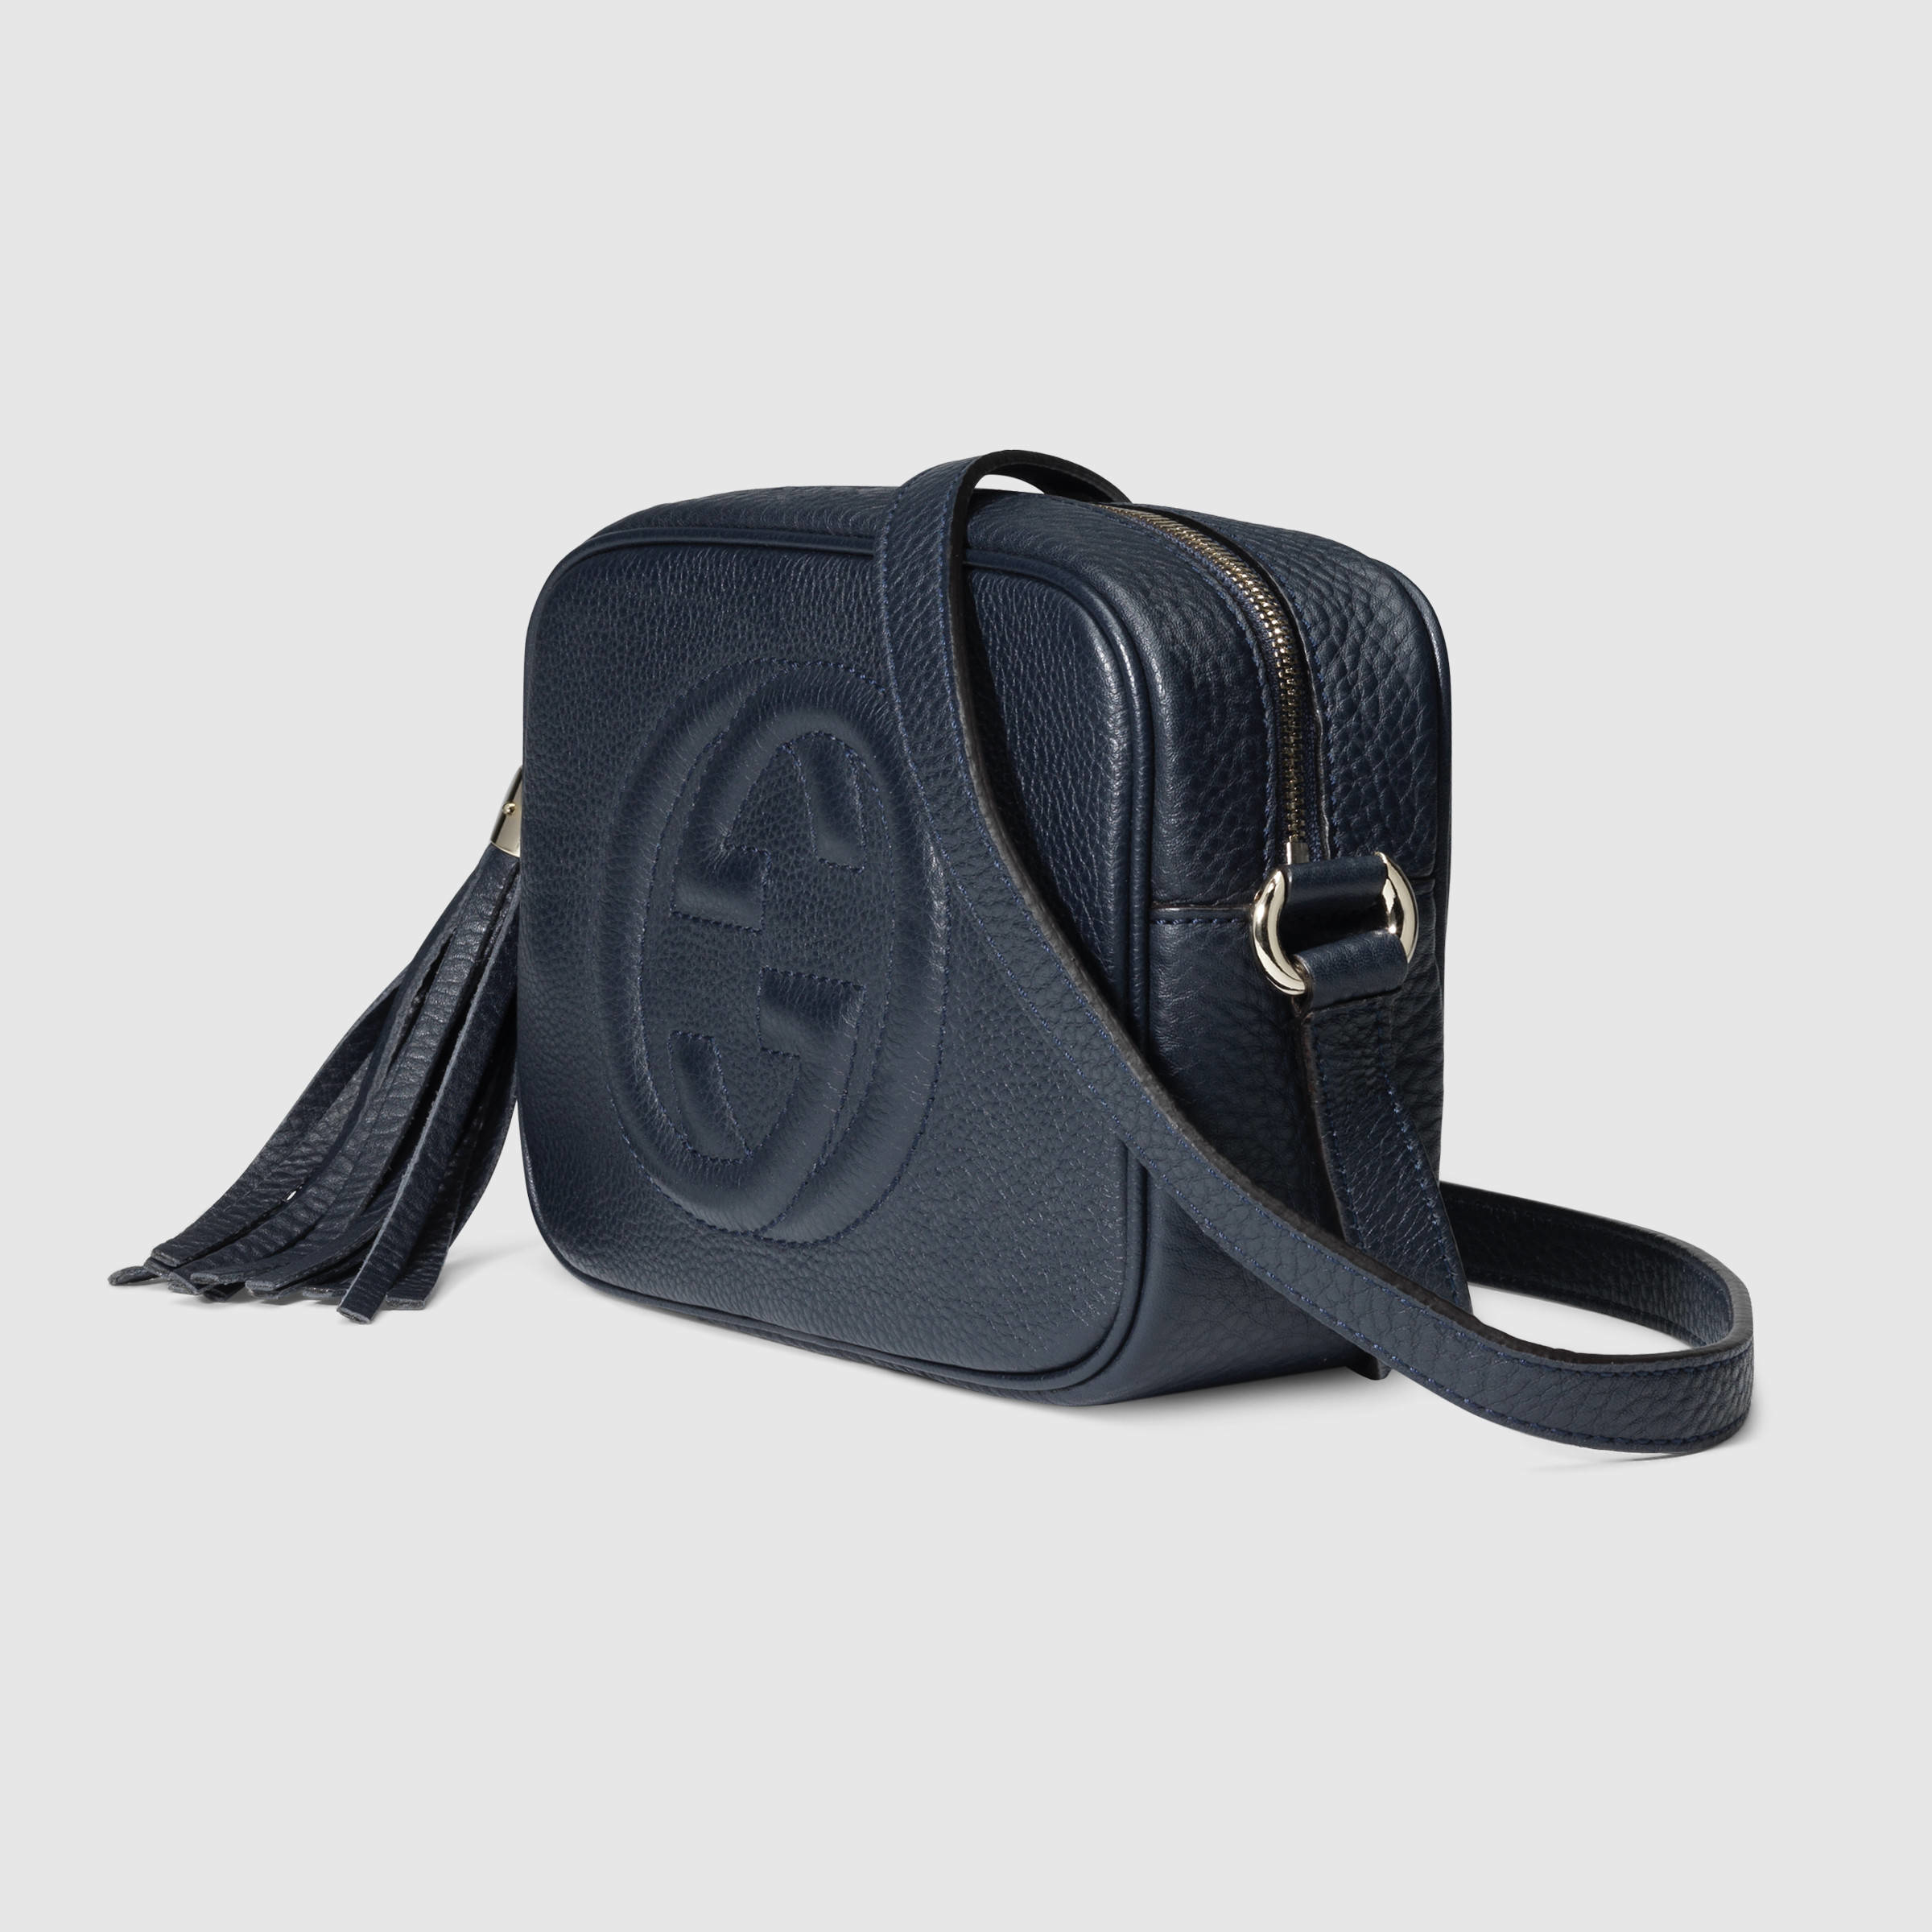 Gucci Soho Leather Disco Bag in Blue | Lyst